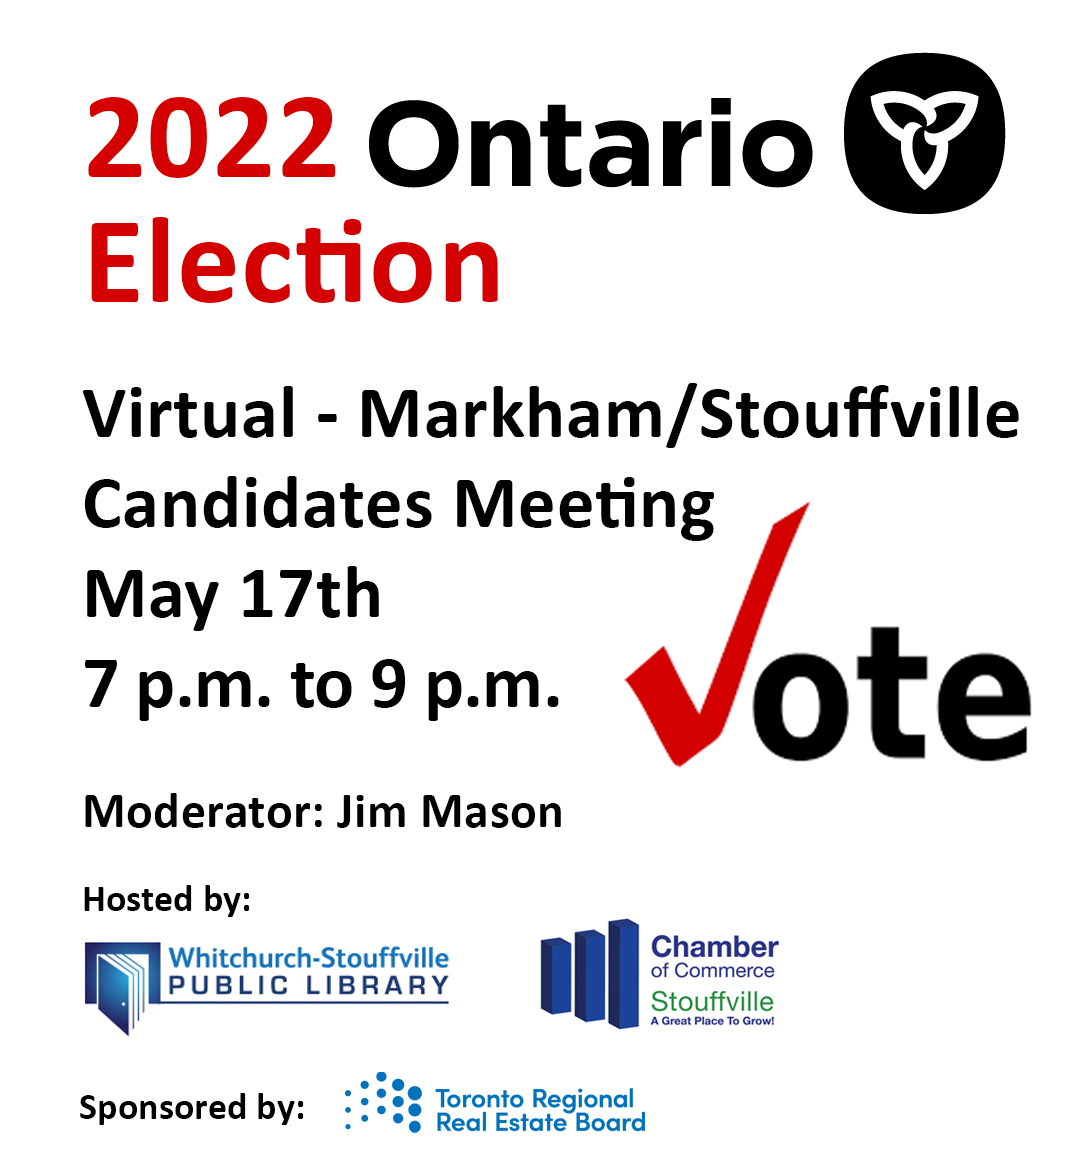 markham-stouffville-candidates-meeting-provincial-election-discover